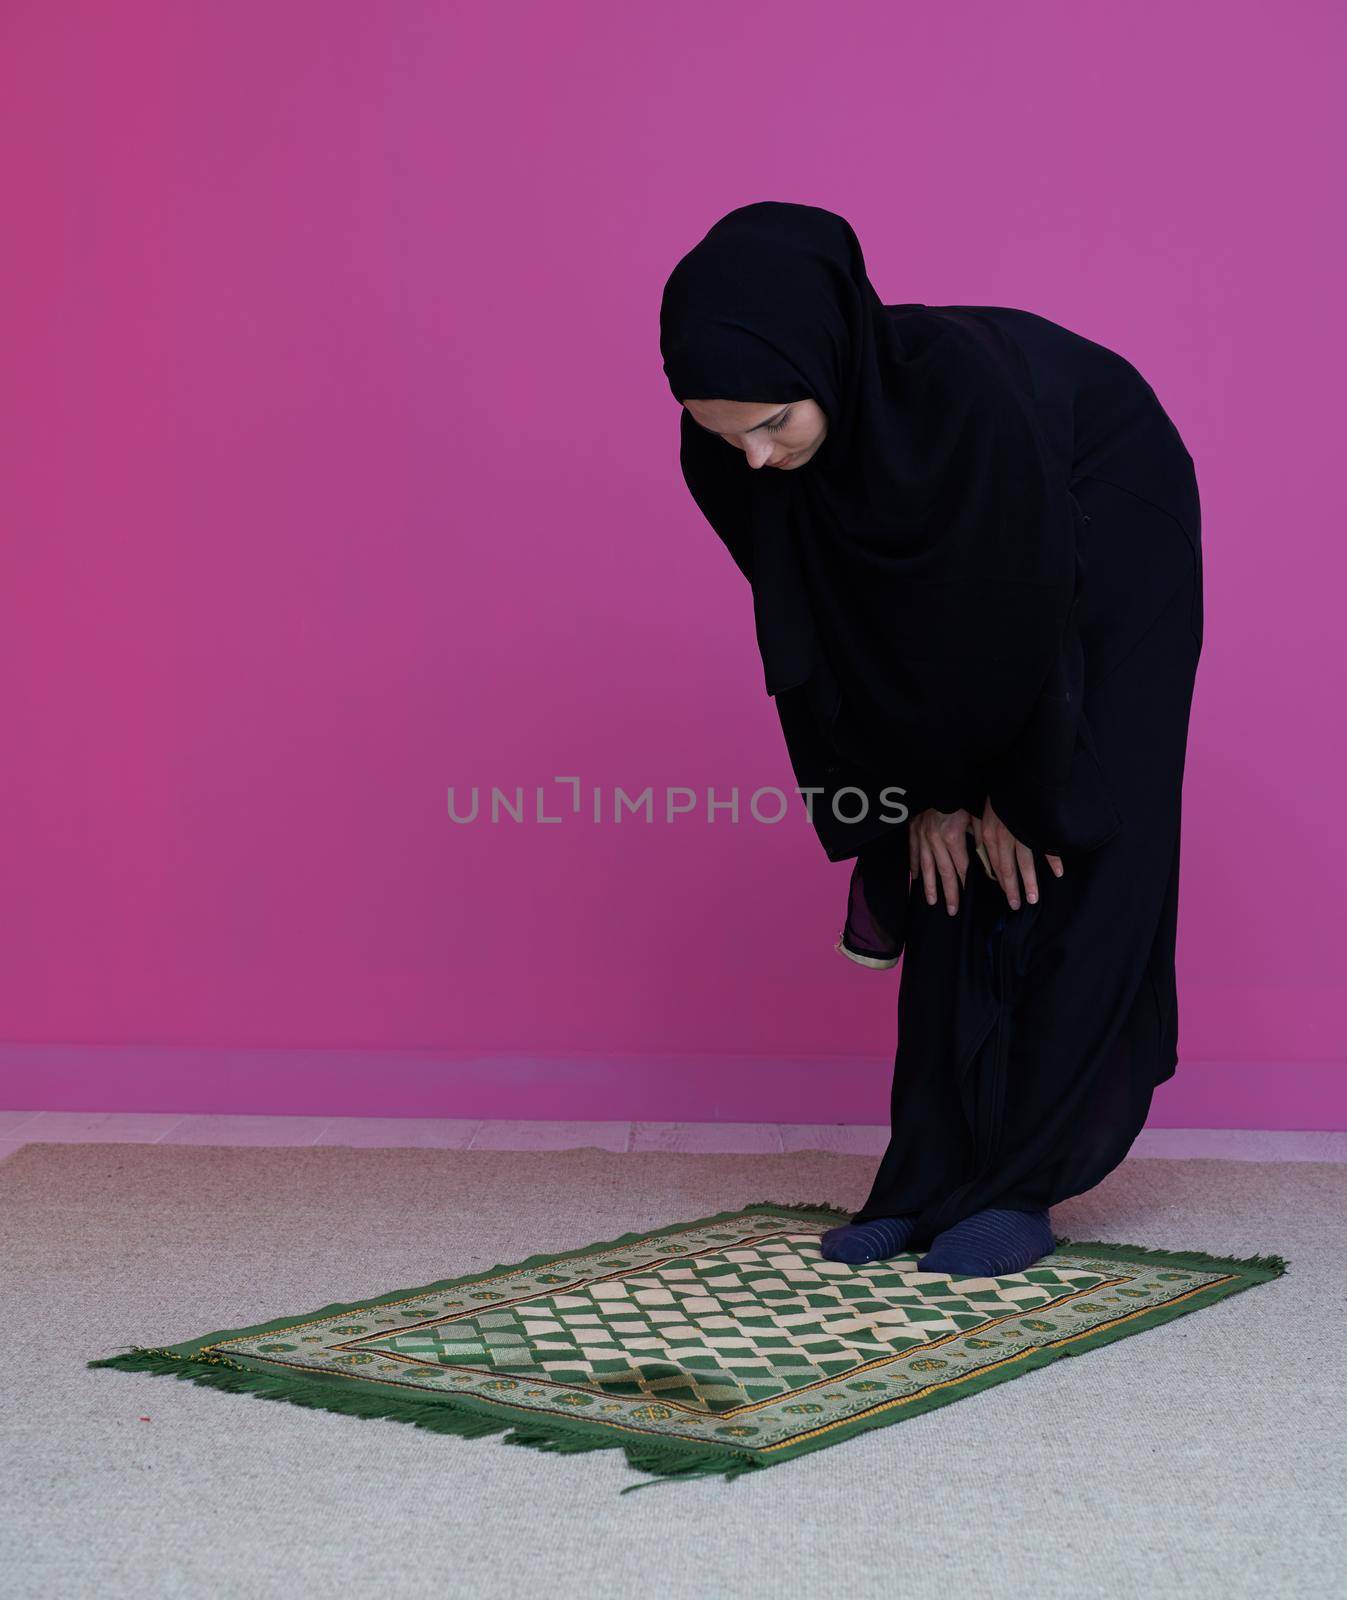 Muslim woman in namaz praying for Allah muslim god. Muslim woman on the carpet praying in traditional middle eastern clothes, Woman in Hijab